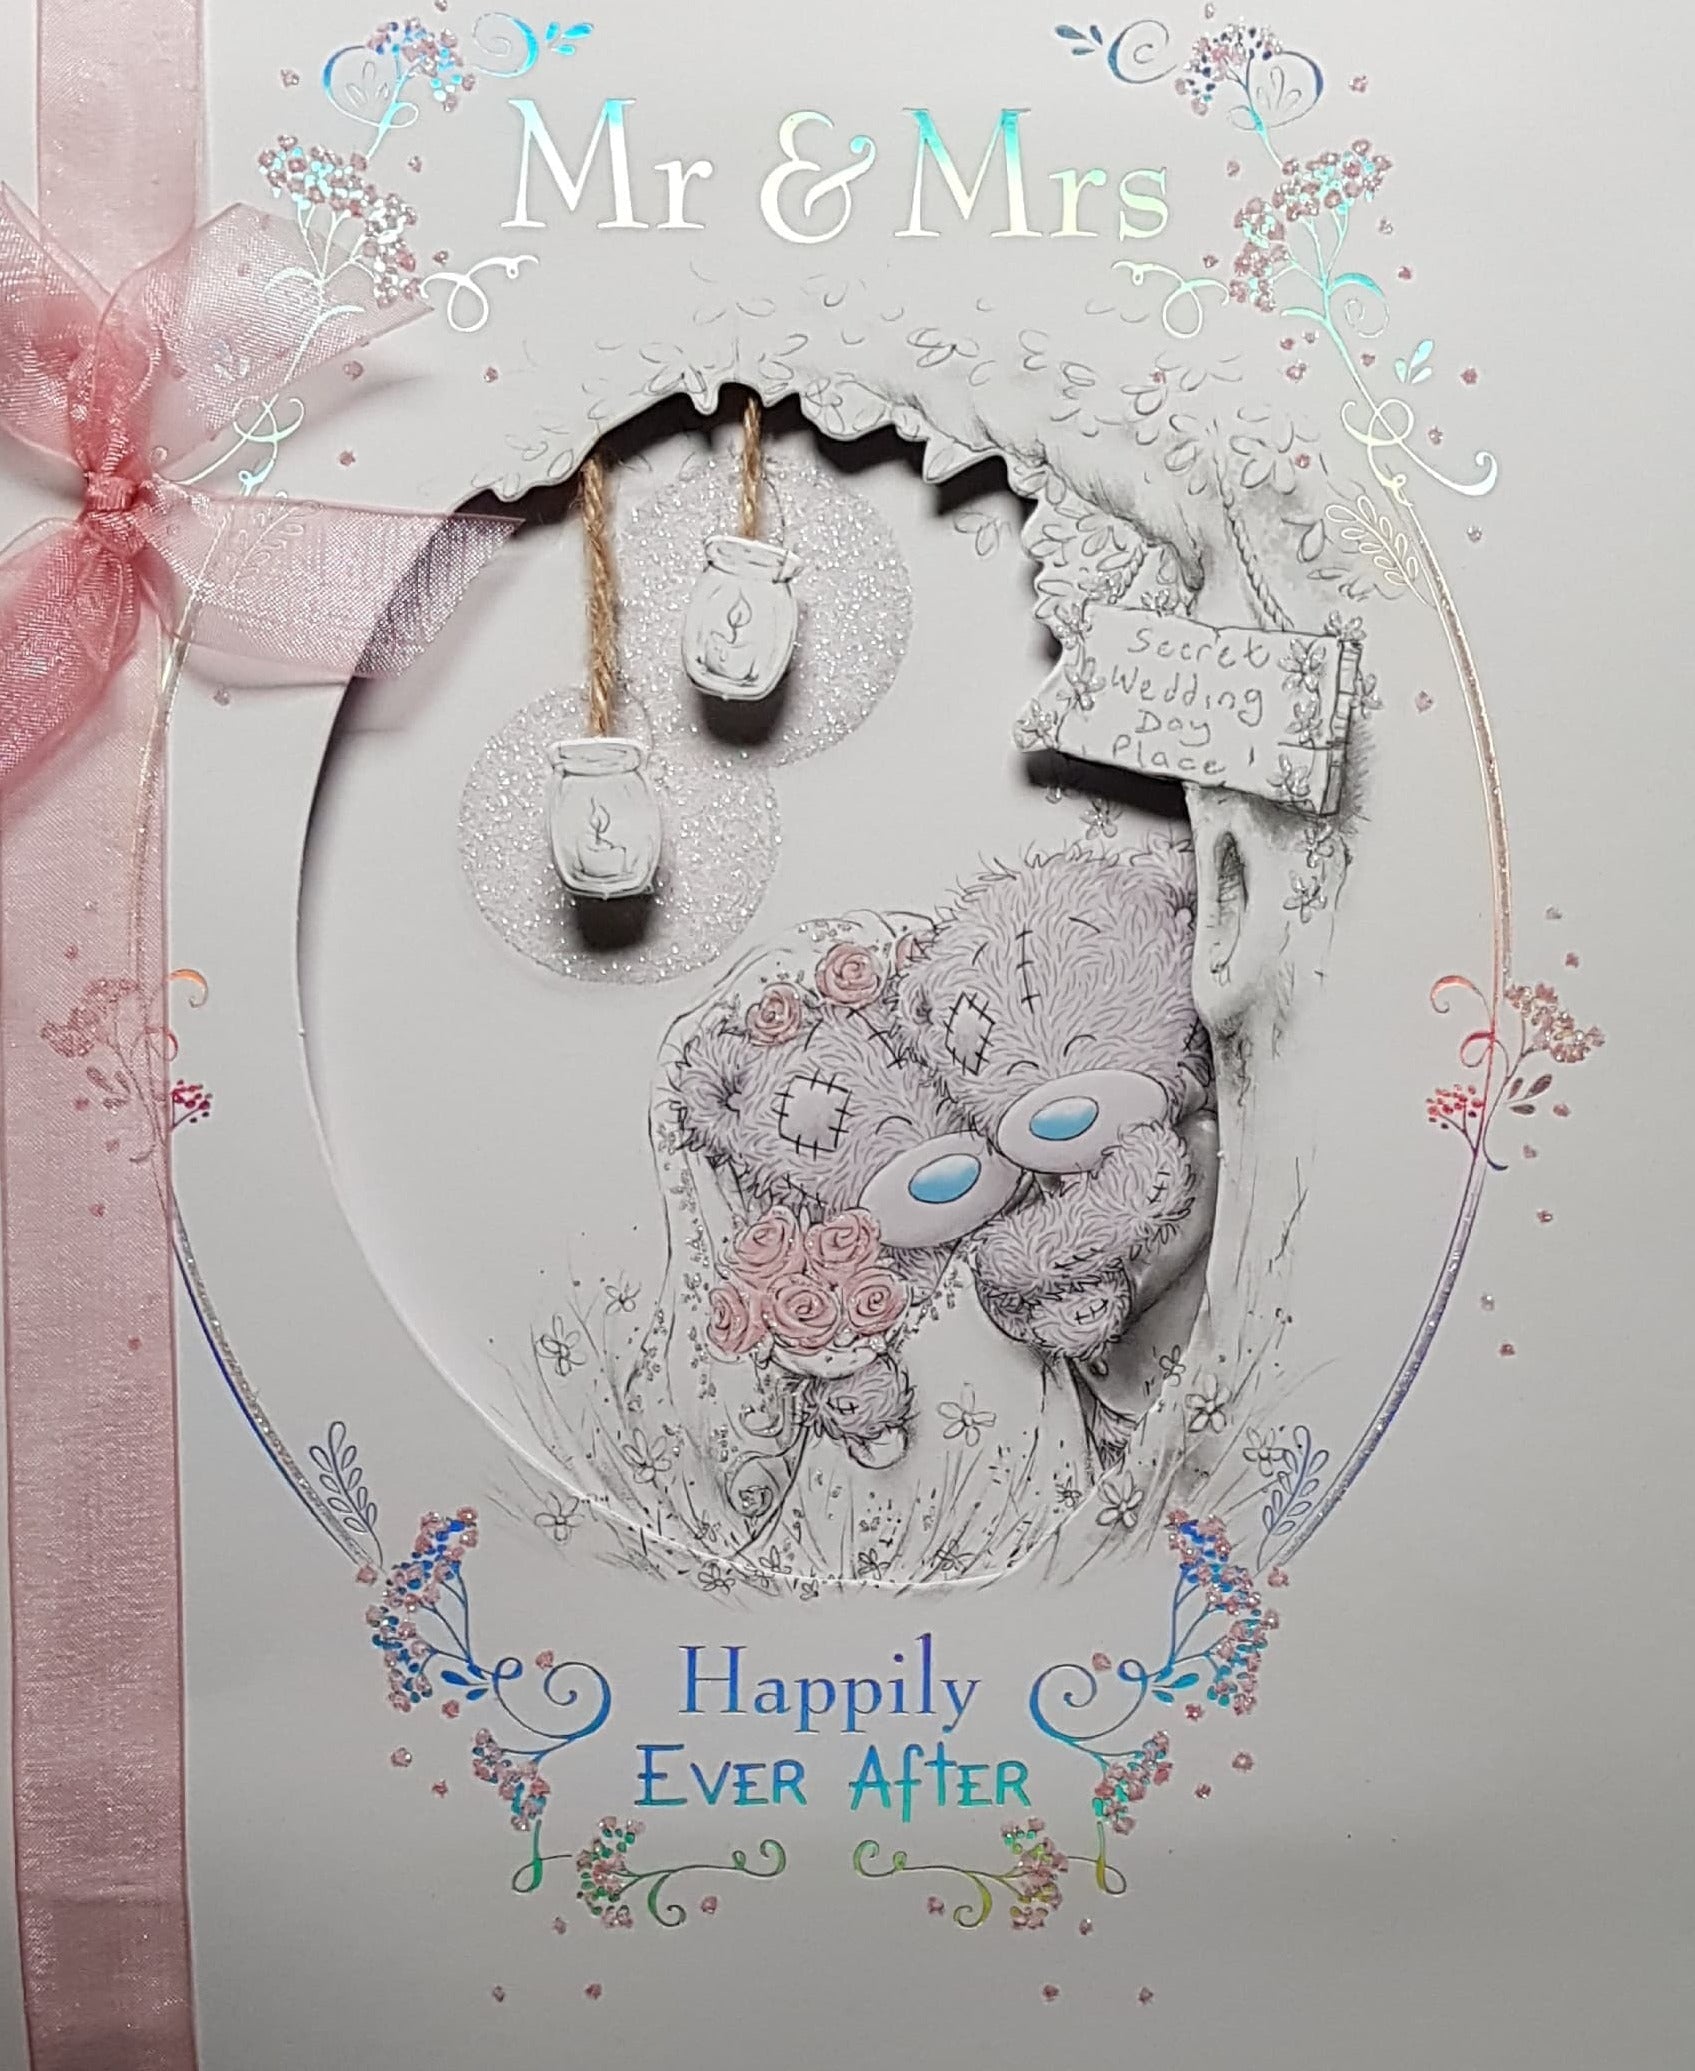 Wedding Card - Happily Ever After / Happy Teddies Holding Roses At A Tree Trunk